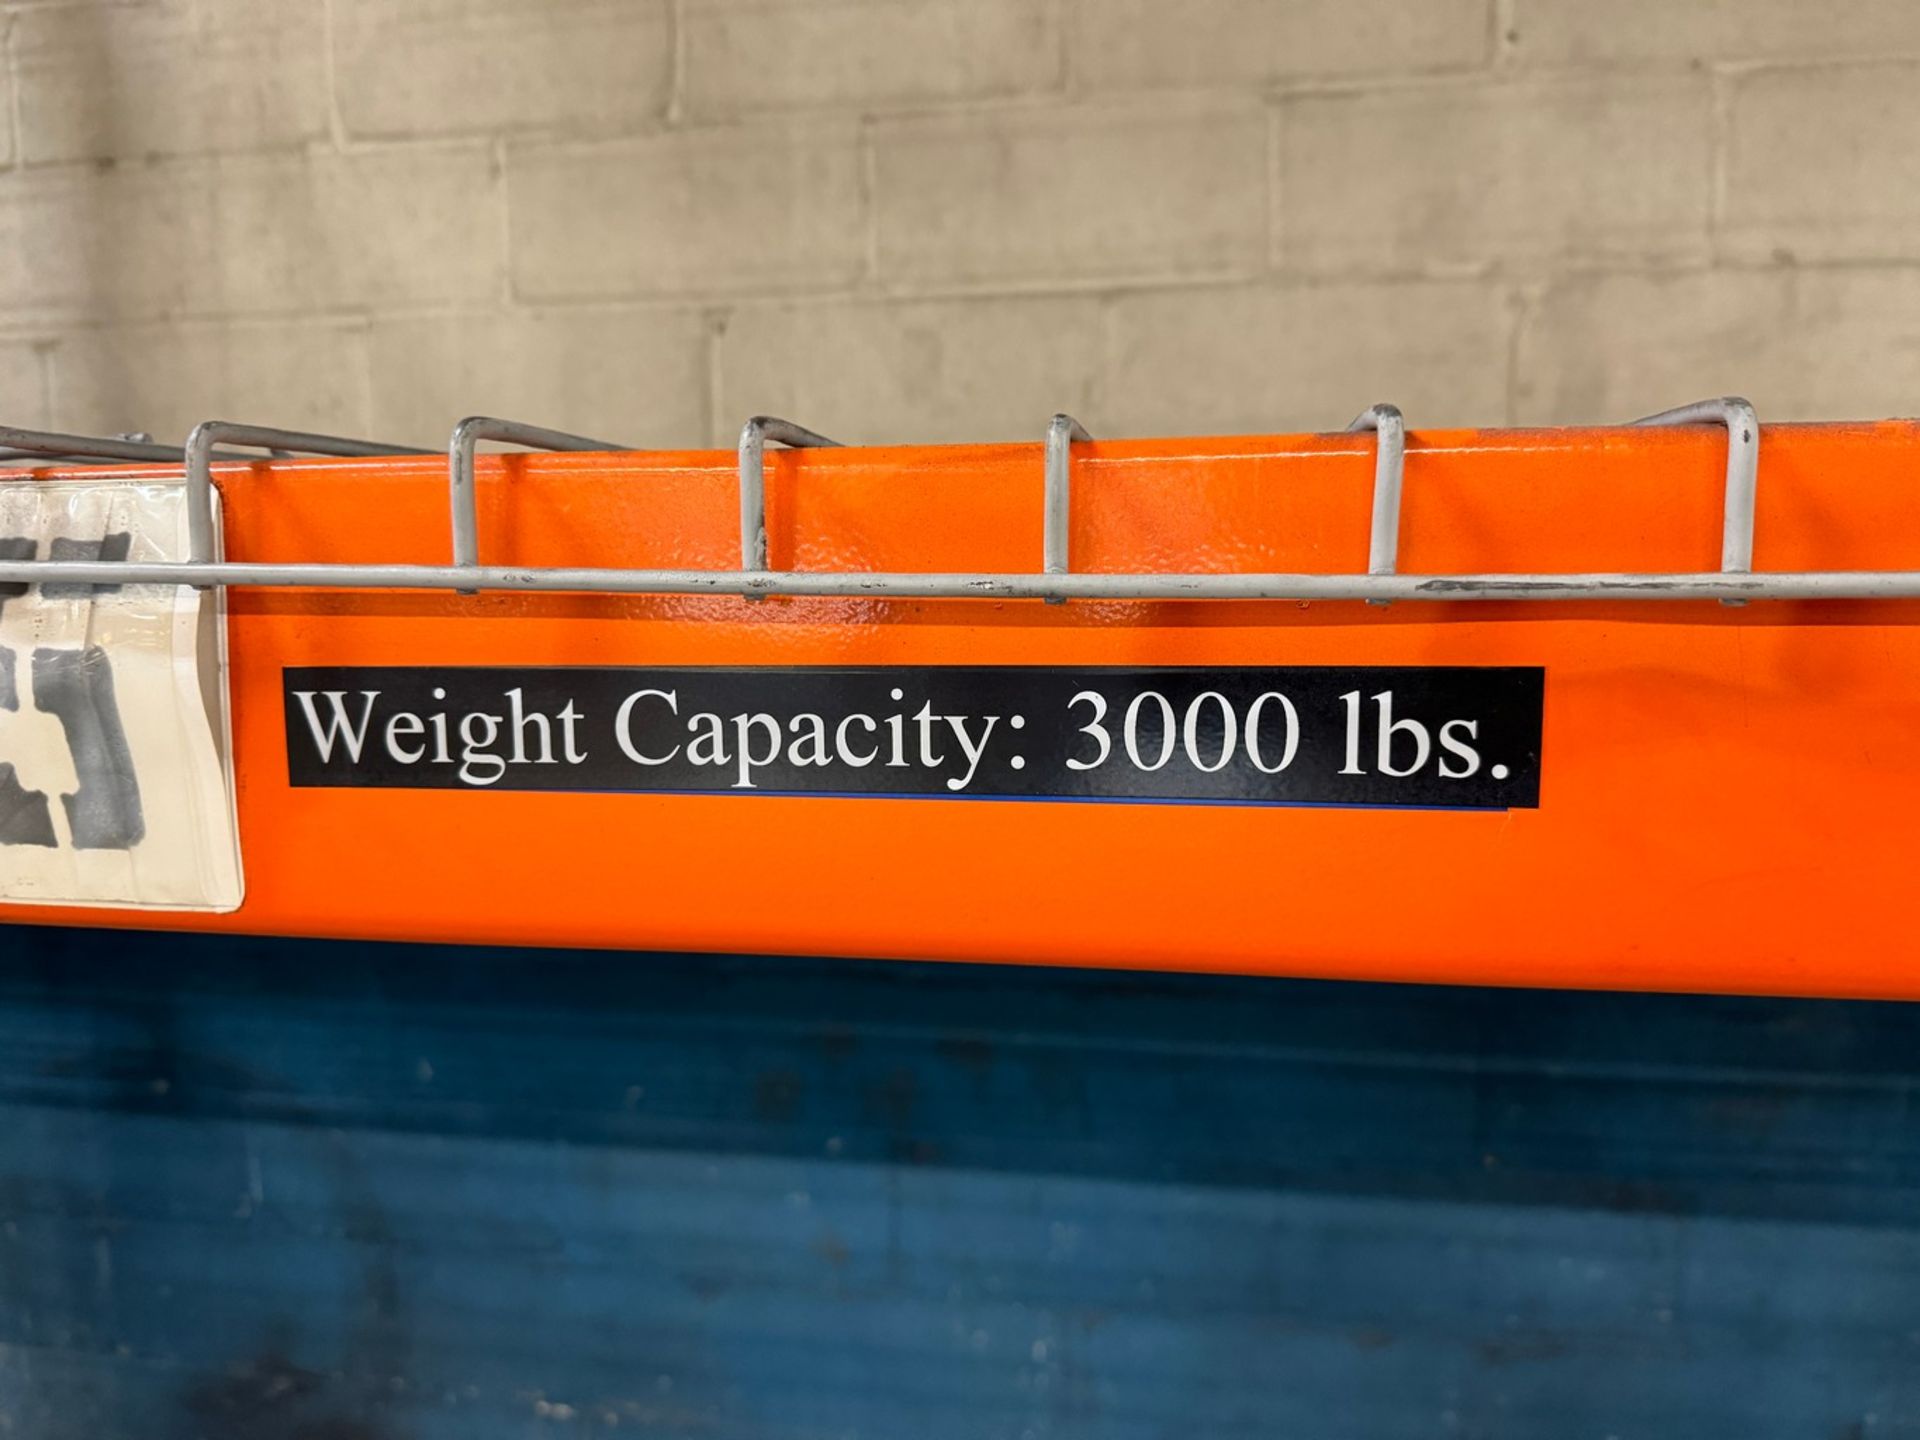 15-Sections Heavy Duty Pallet Racking, 96"W x 44"D x 144"H, 3000 LB Weight Capacity - Image 2 of 2